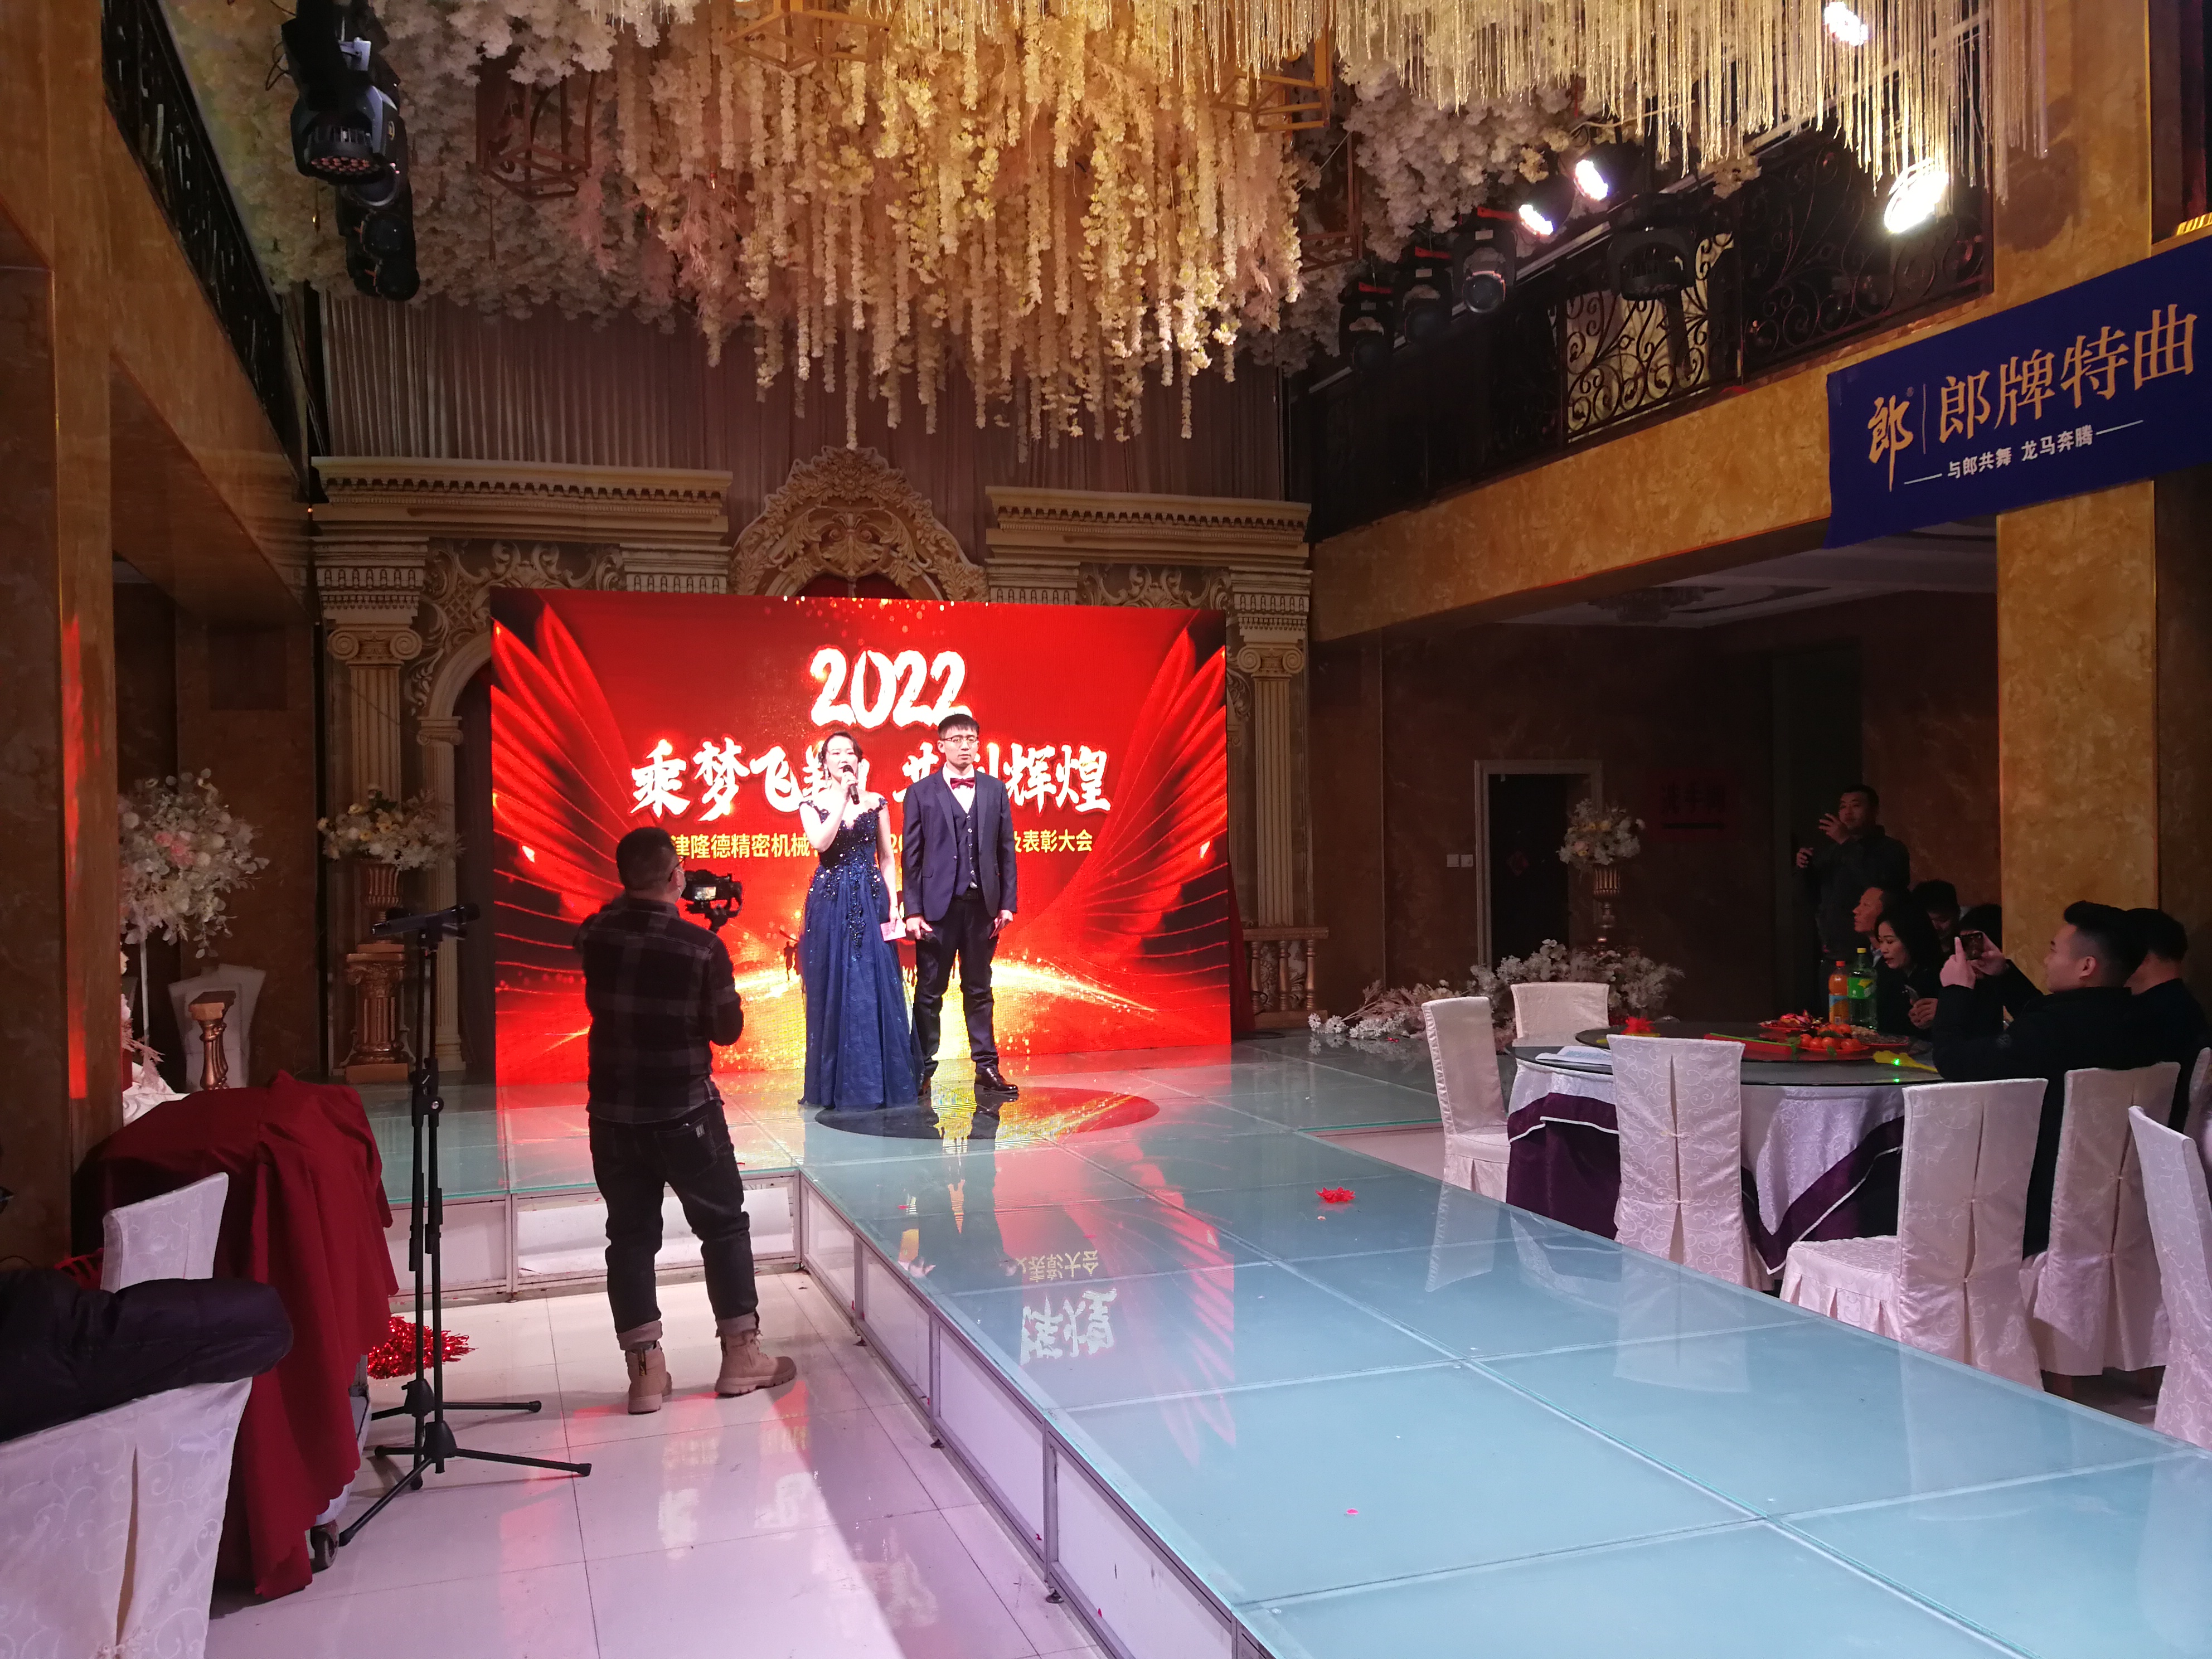 The grand Ceremony of the 2022 Tianjin Longde Annual Conference